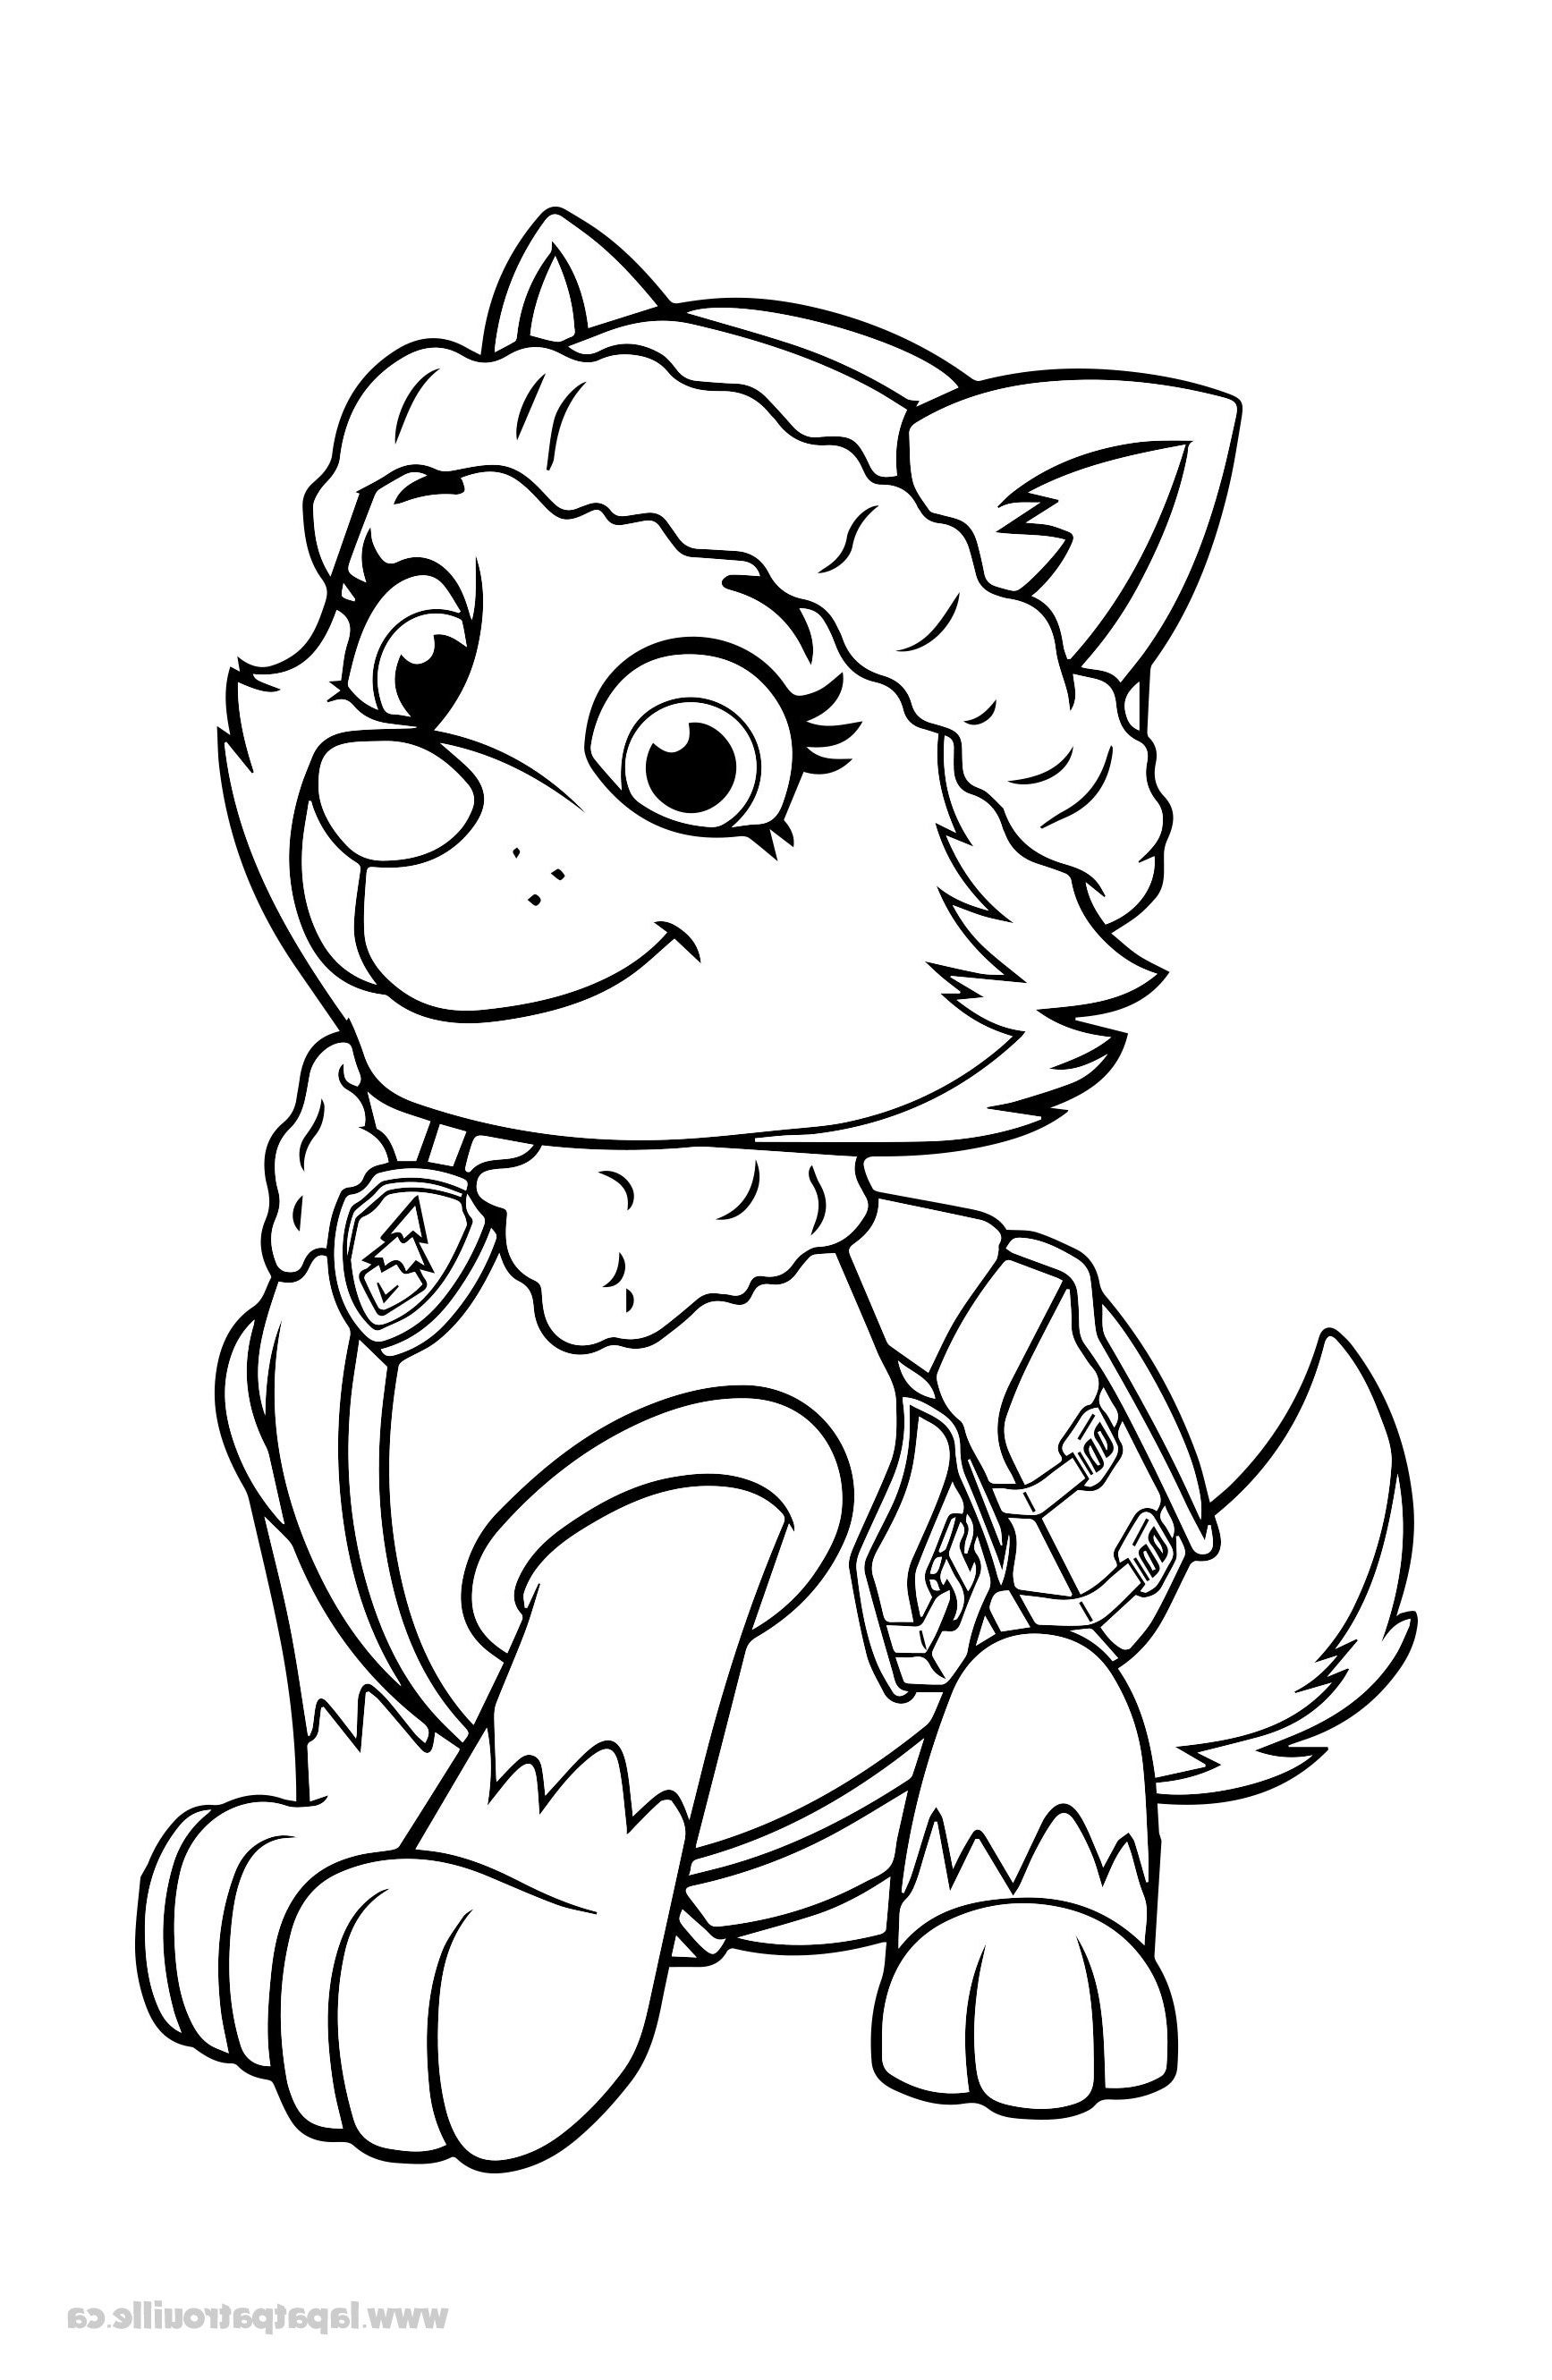 everest a colorier Paw Patrol Coloring Pages, Dog Coloring Page